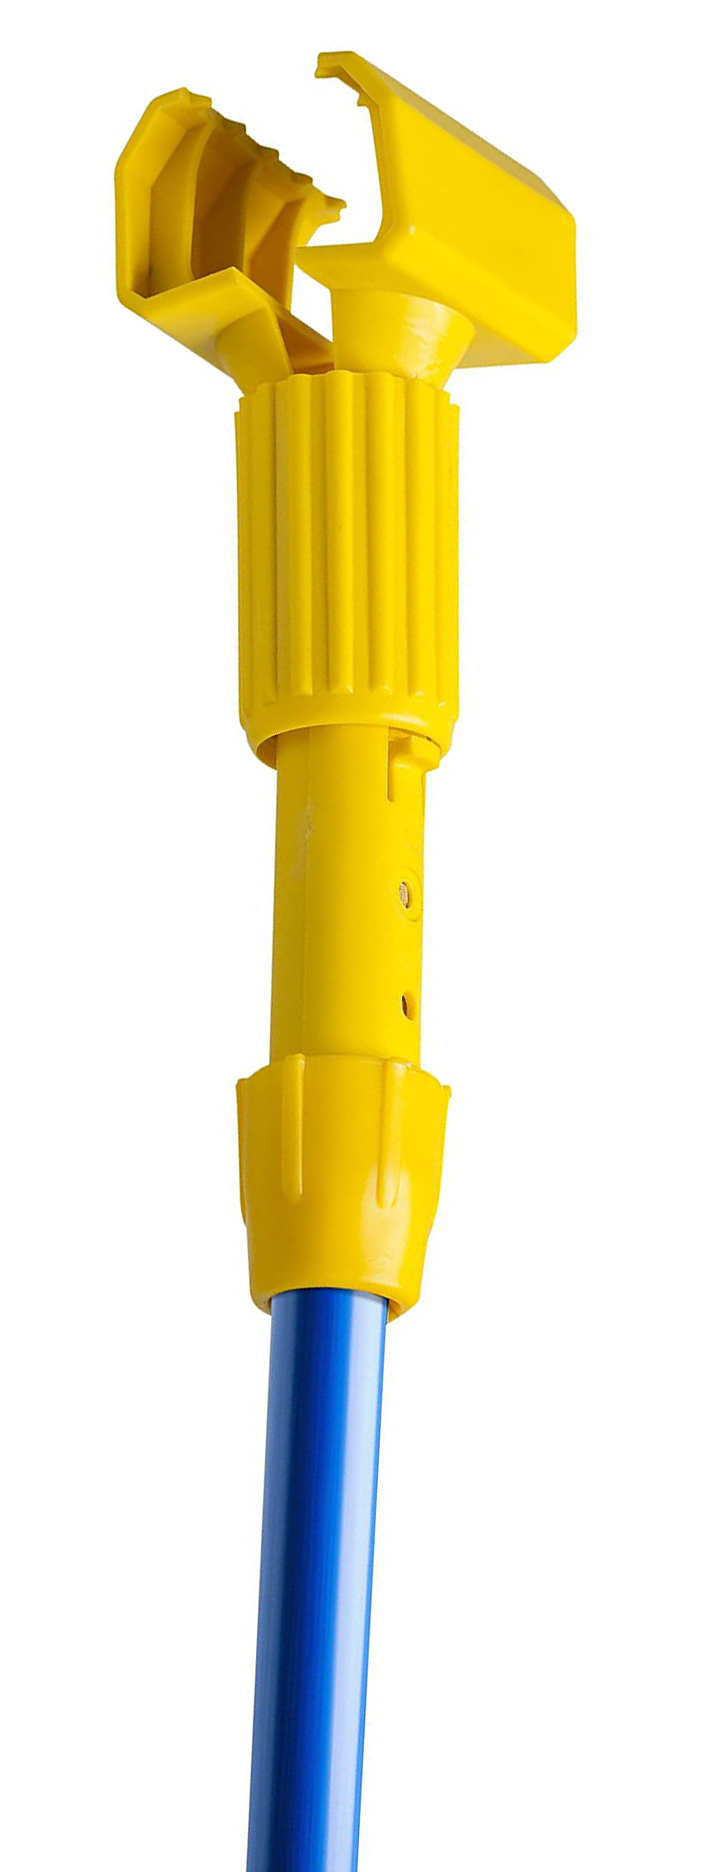 60" Jaws Style Mop Handle, Fiberglass Handle, Yellow and Blue